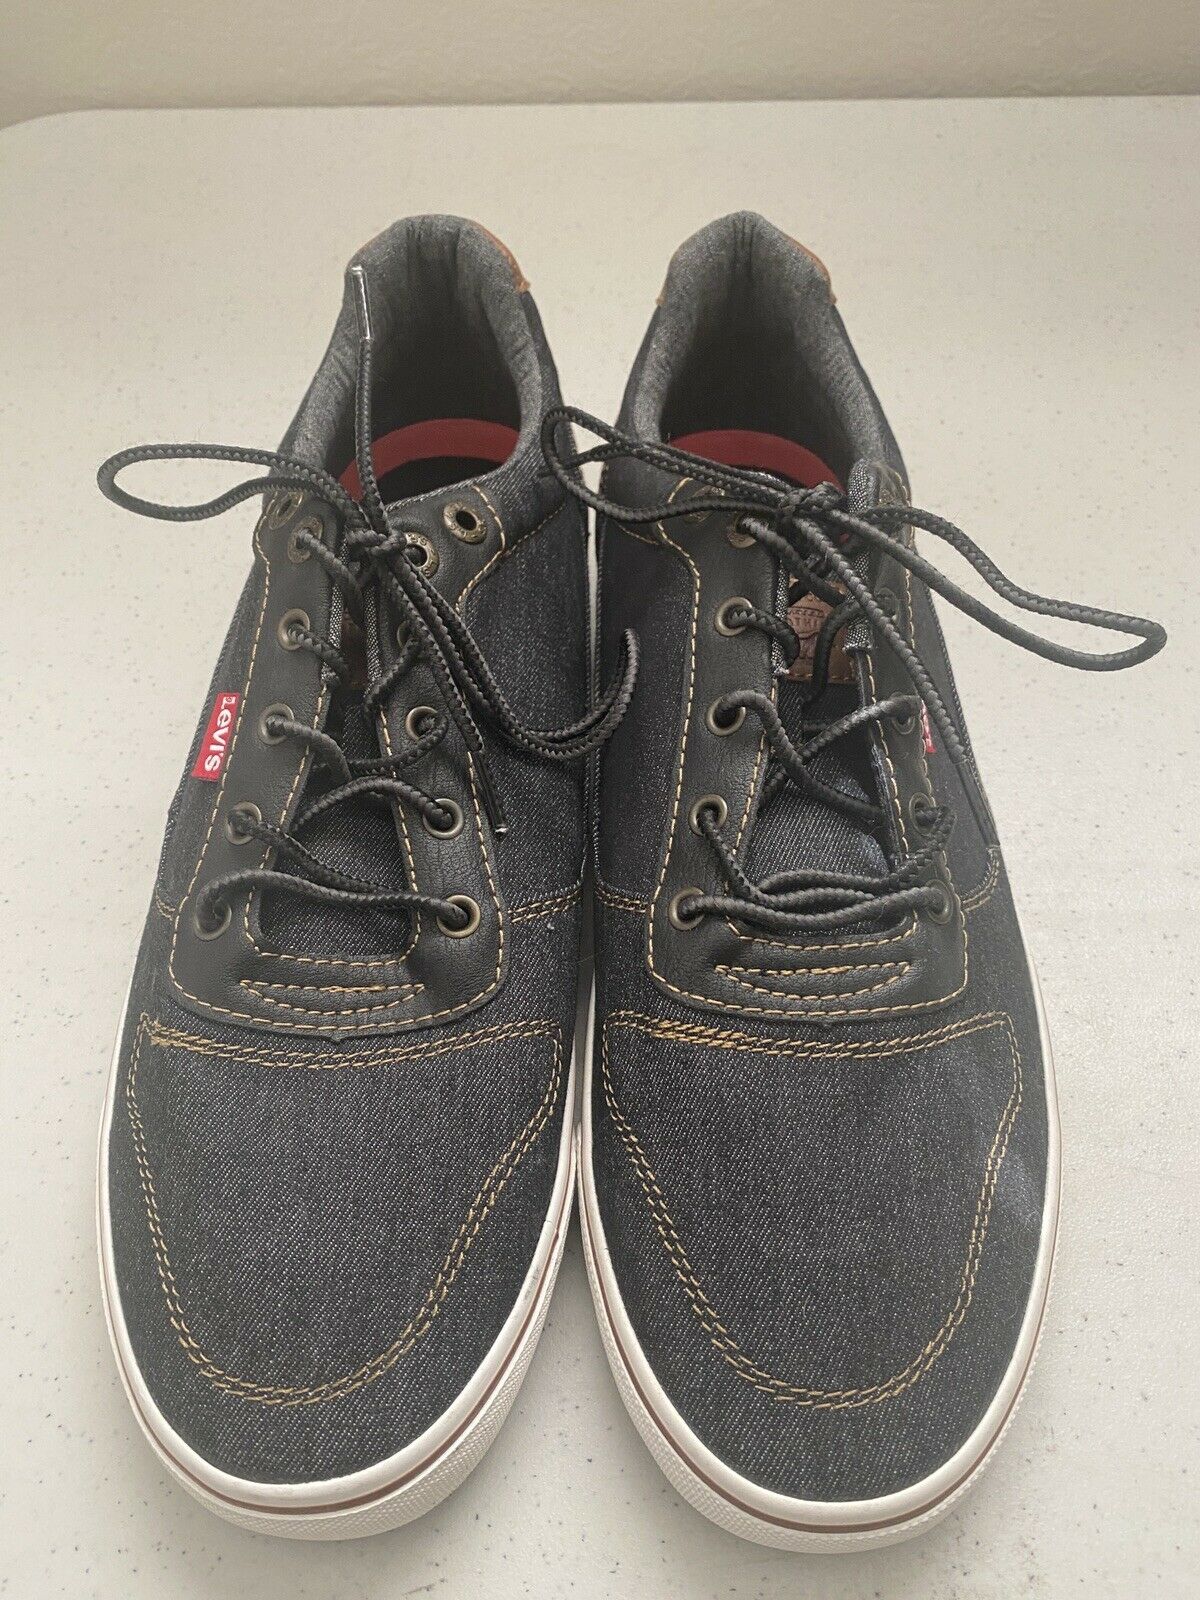 New without Box Levis Comfort Shoes Size 10.5 517813-01A-Mens